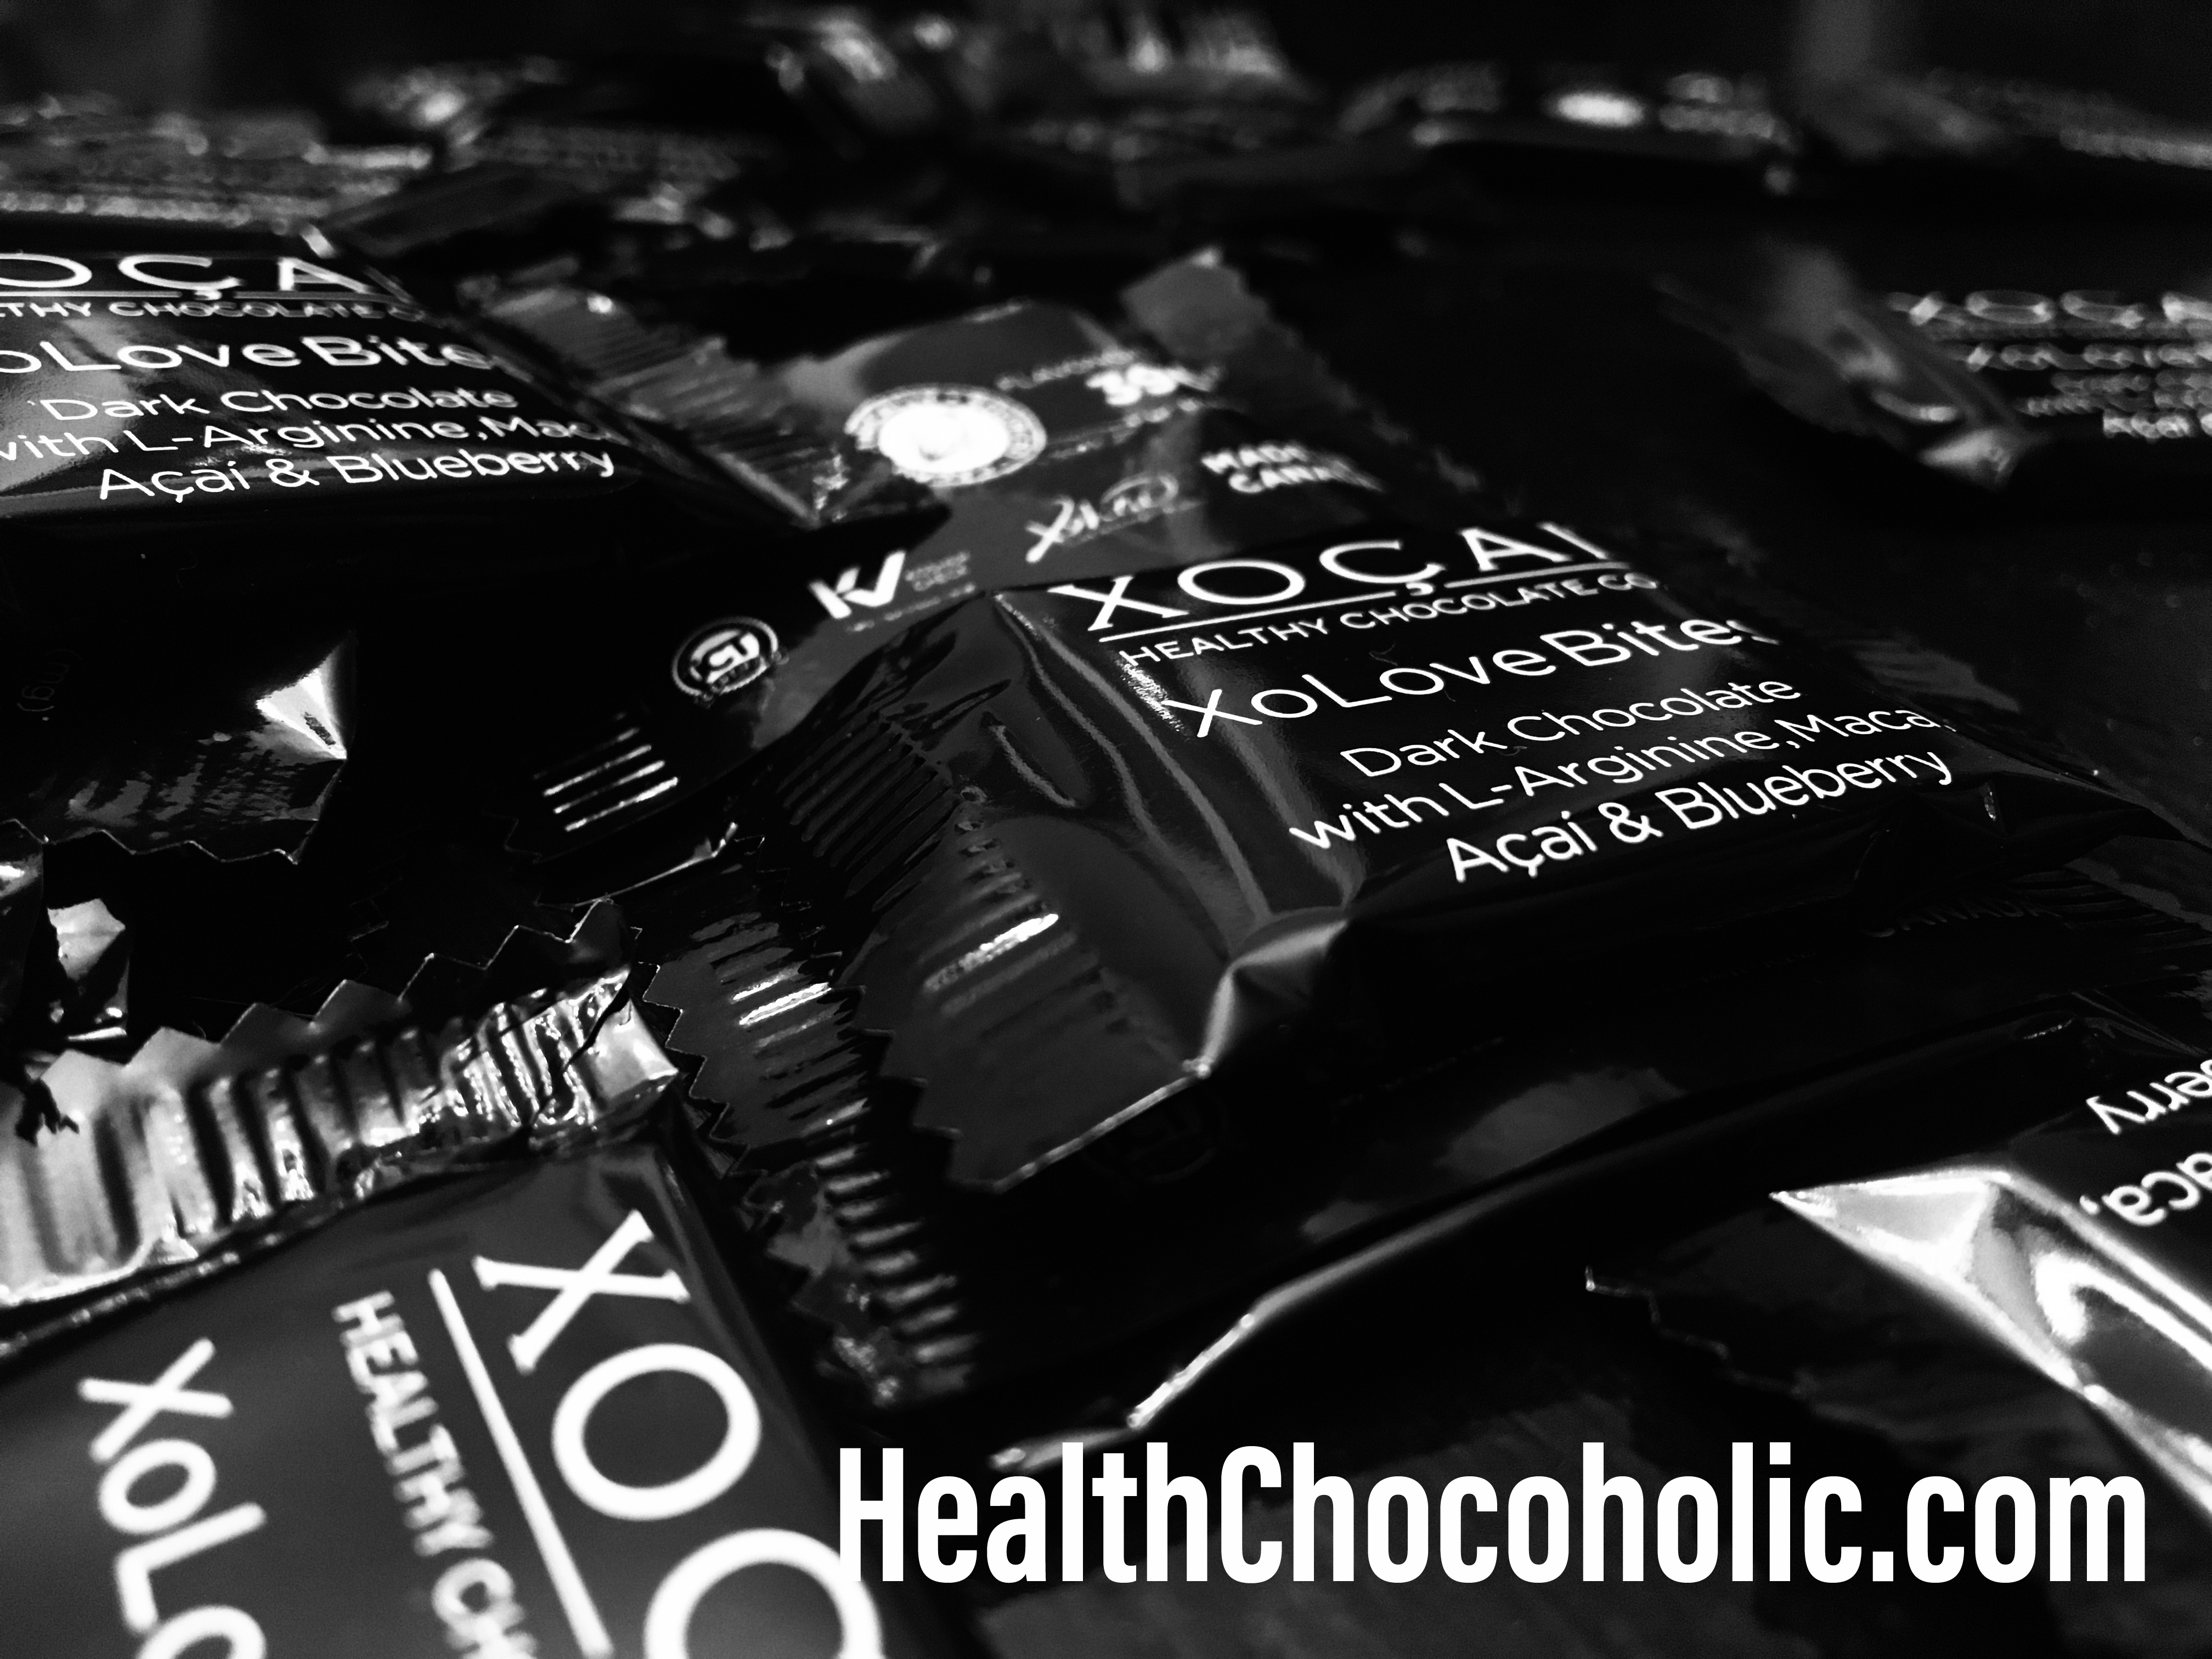 Have You Tried Healthy Chocolate Beyond Love Bites For Passion And A Zest For Life?  Oh MY!